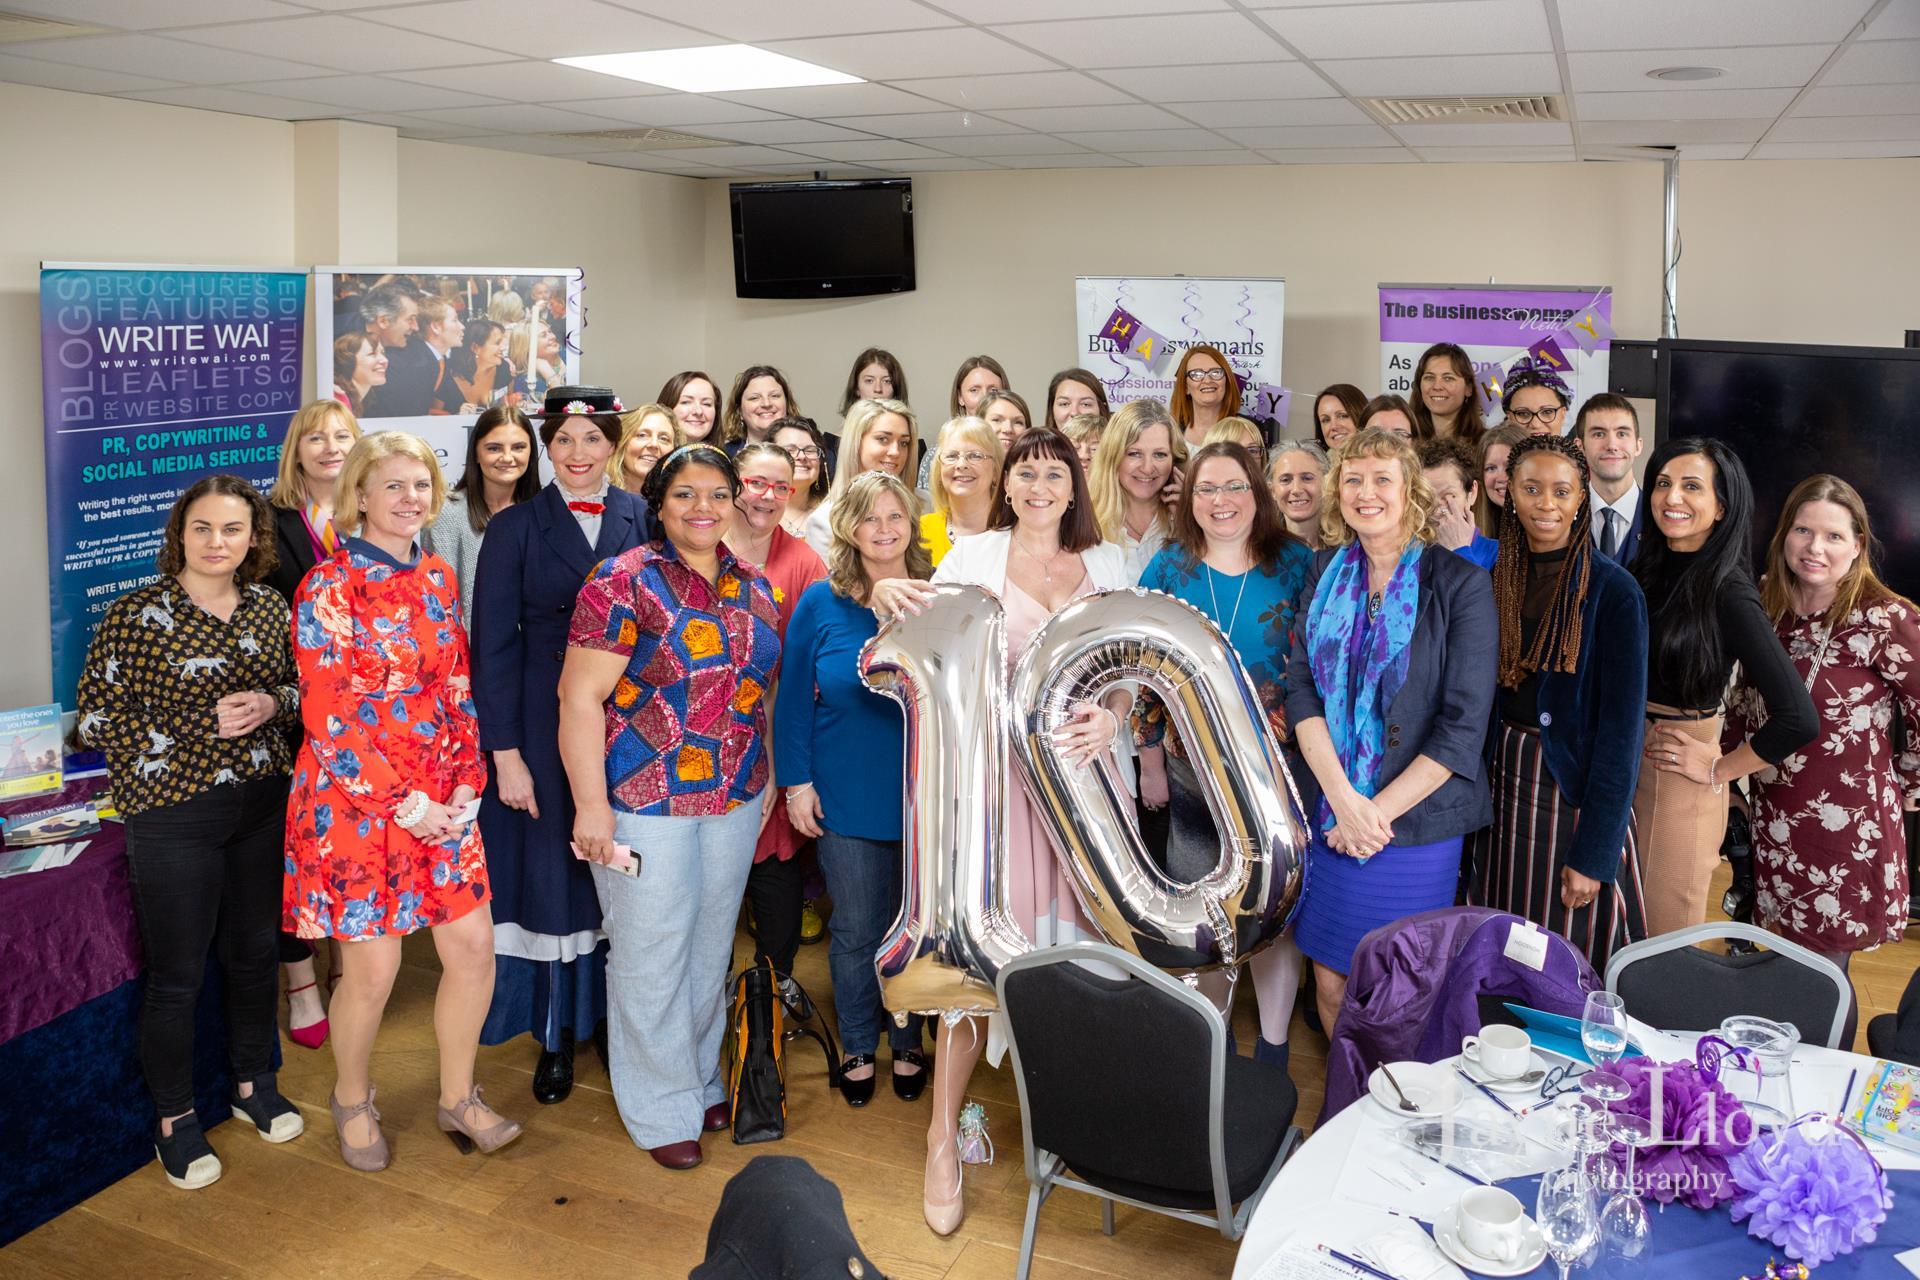 10 years networking for women in business